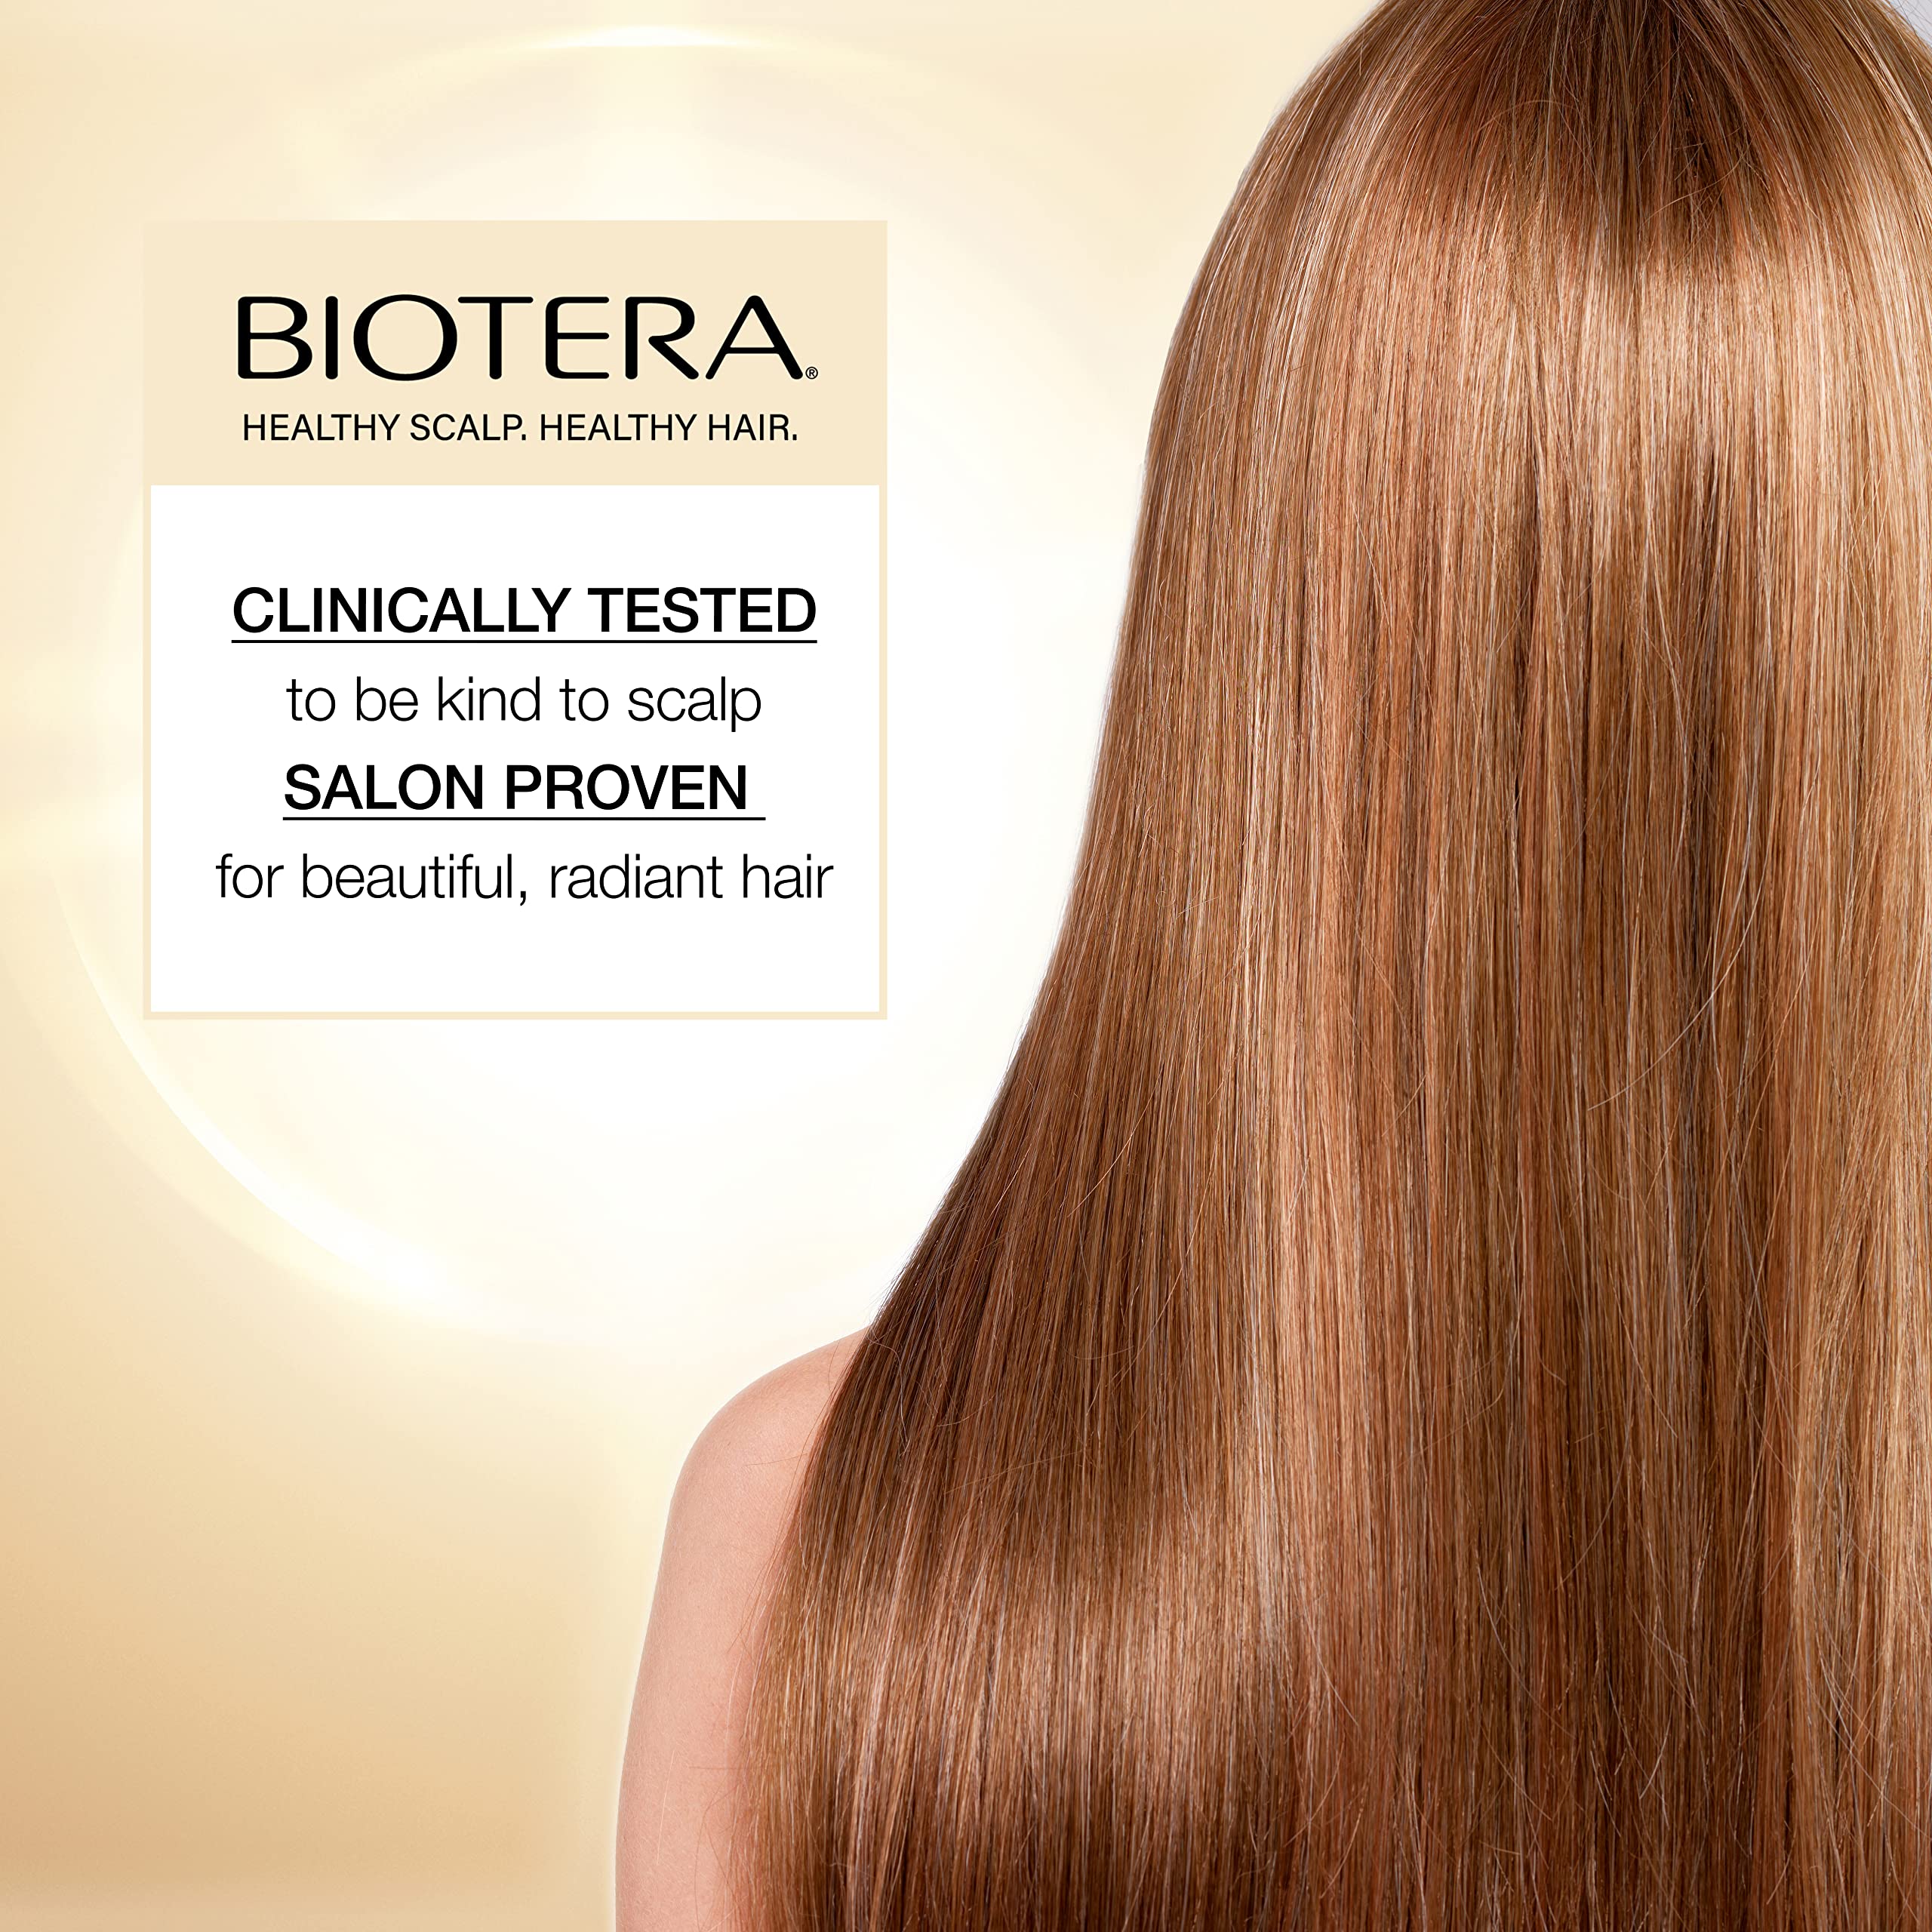 BIOTERA Long & Healthy Strengthening Shampoo and Conditioner | Long or Growing Hair | Microbiome Friendly | Vegan & Cruelty Free | Paraben Free | Color-Safe